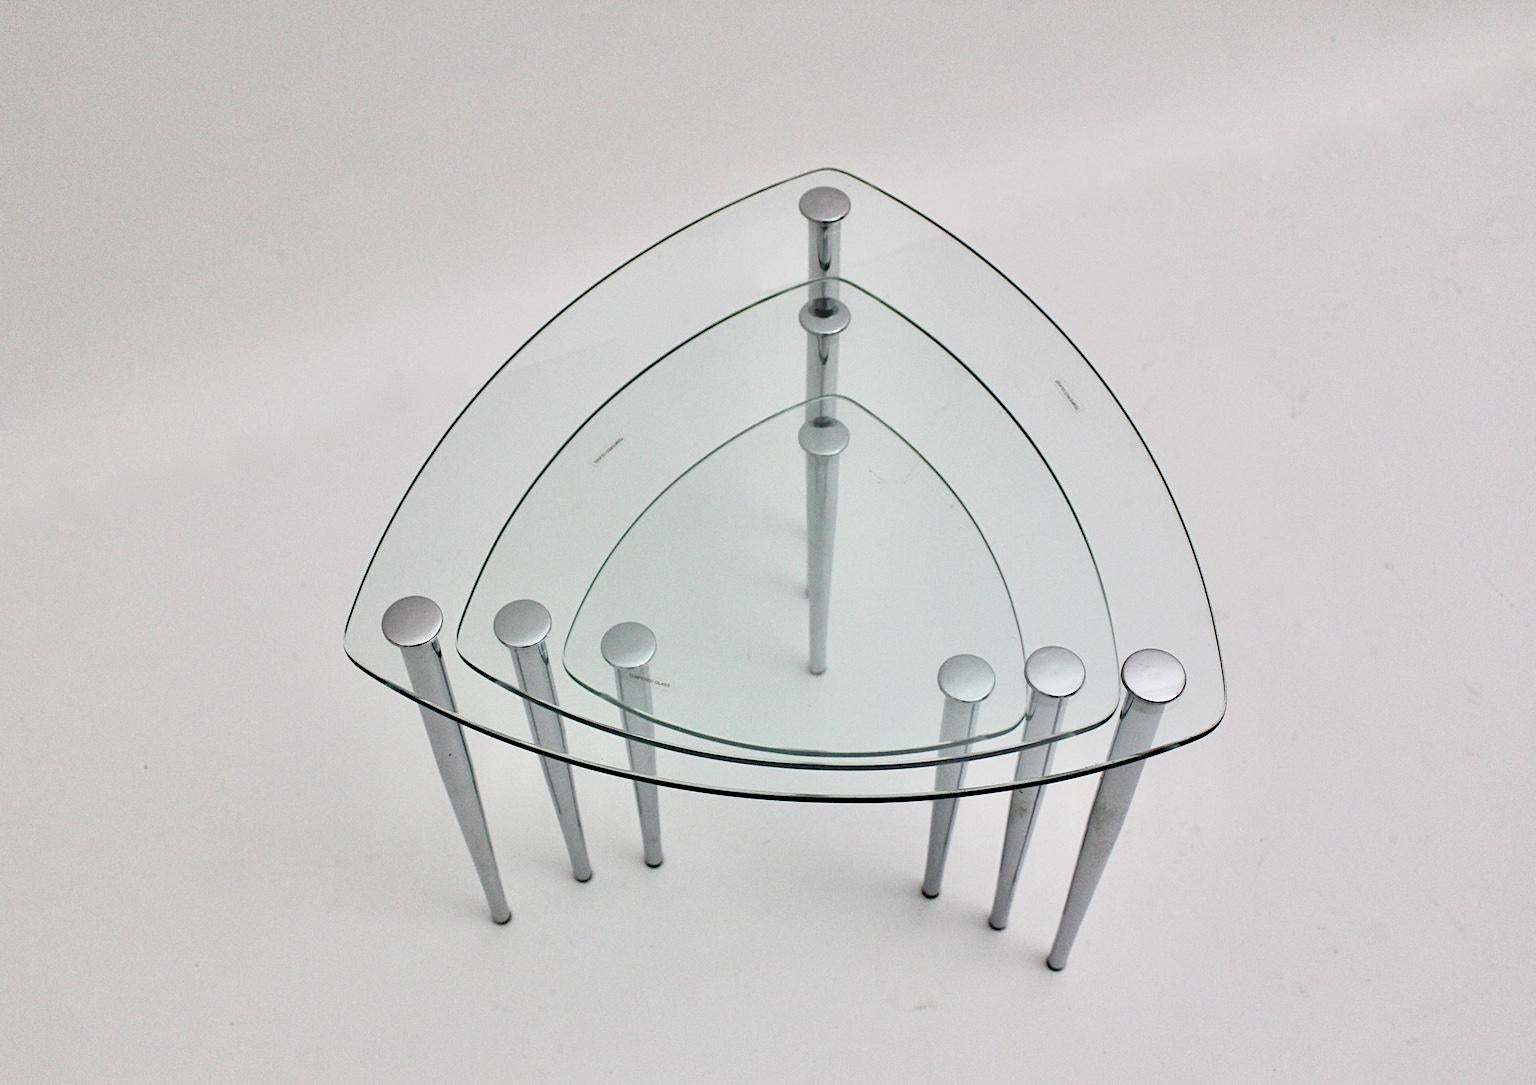 20th Century Mid-Century Modern Vintage Nesting Tables Glass Chrome, Italy, 1960s For Sale